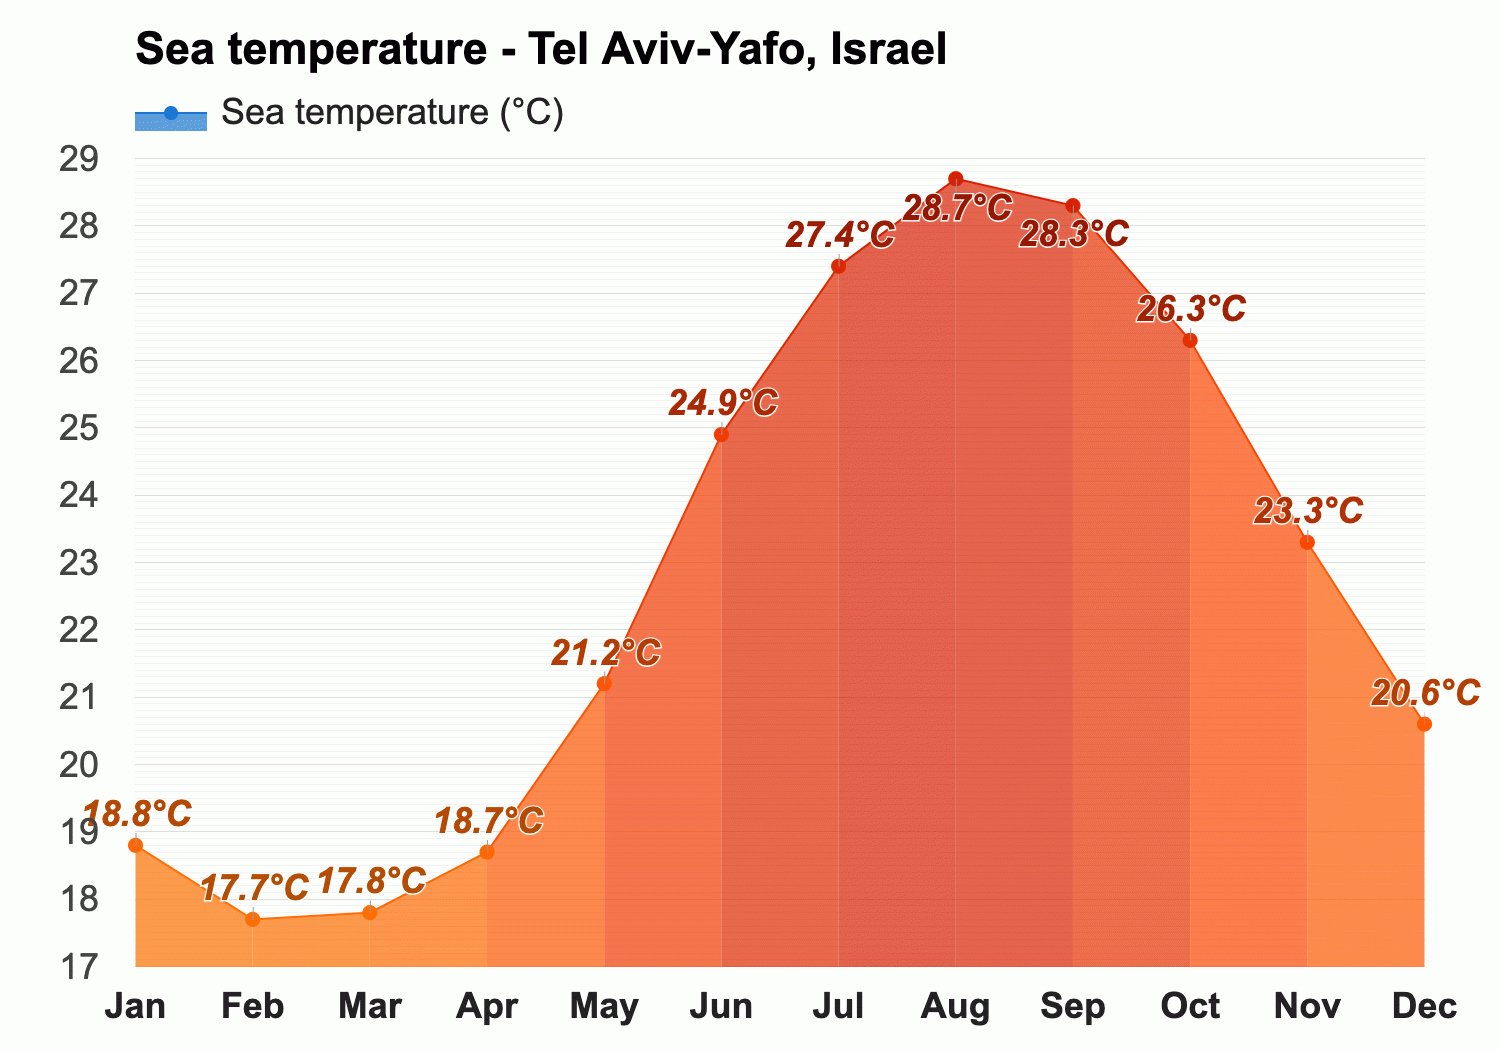 Tel Aviv-Yafo, Israel - Climate & Monthly weather forecast